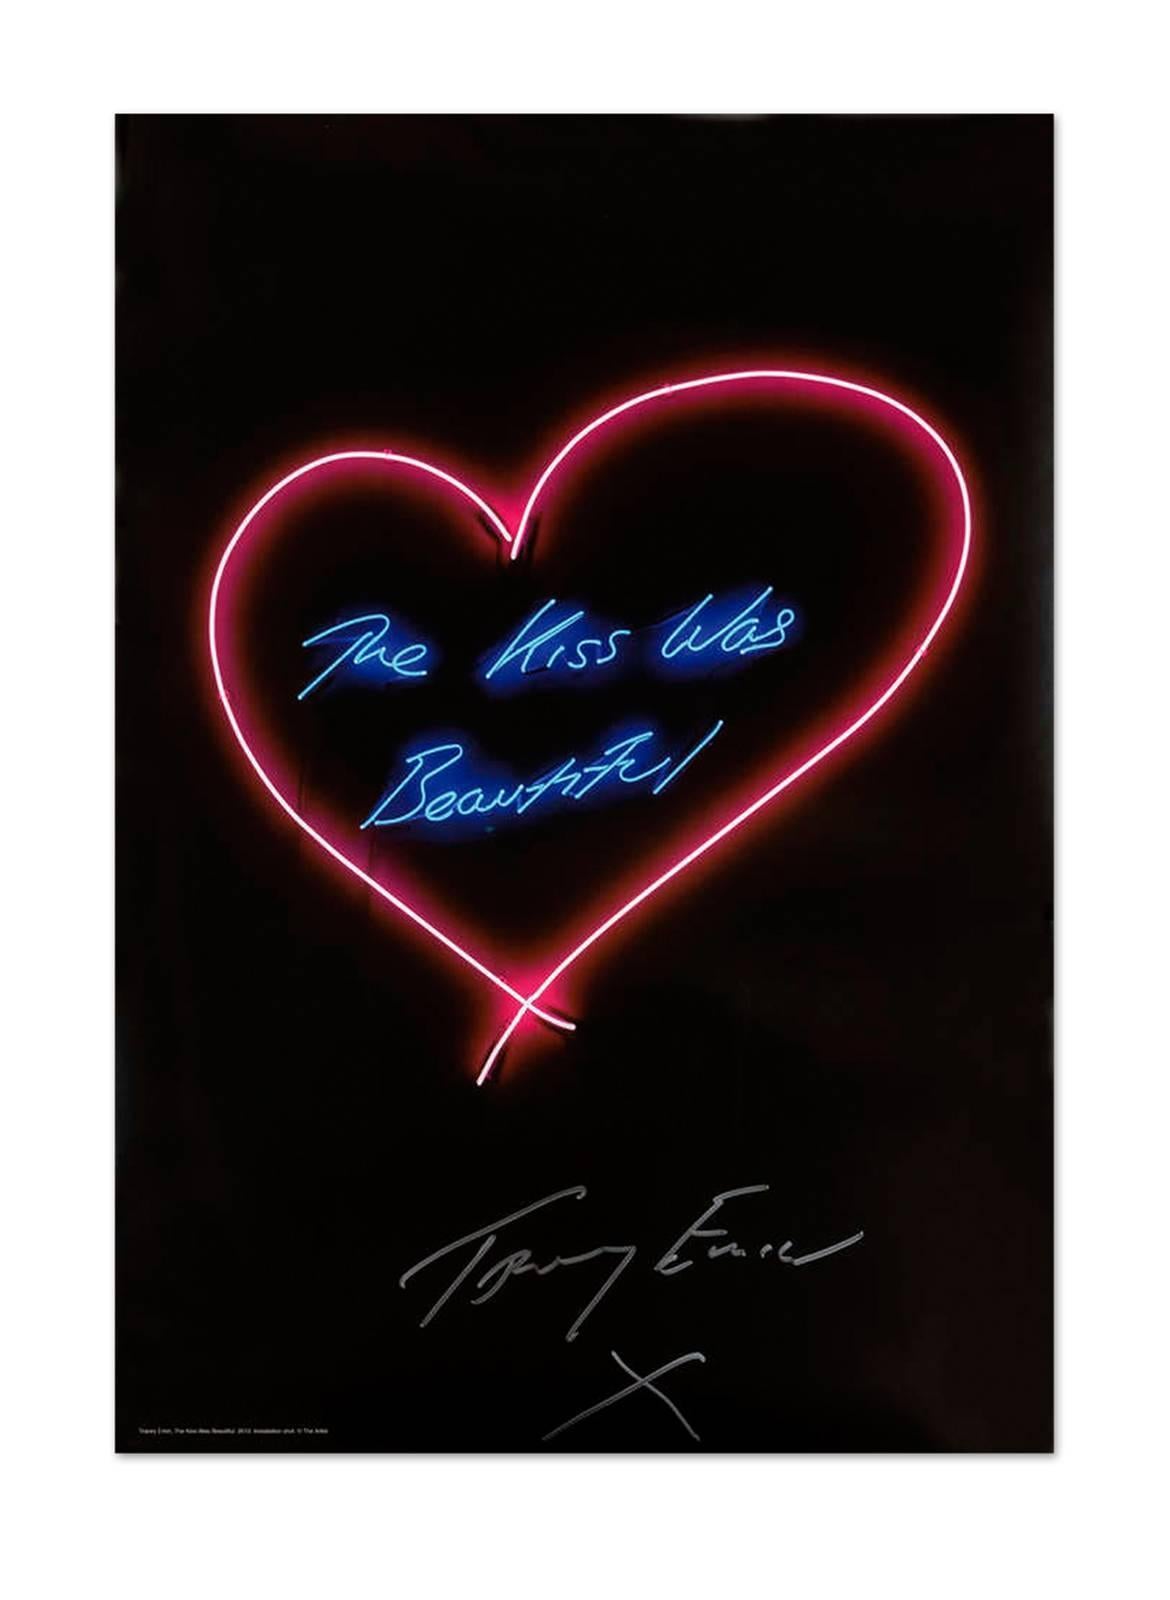 Tracey Emin Abstract Print - The Kiss Was Beautiful